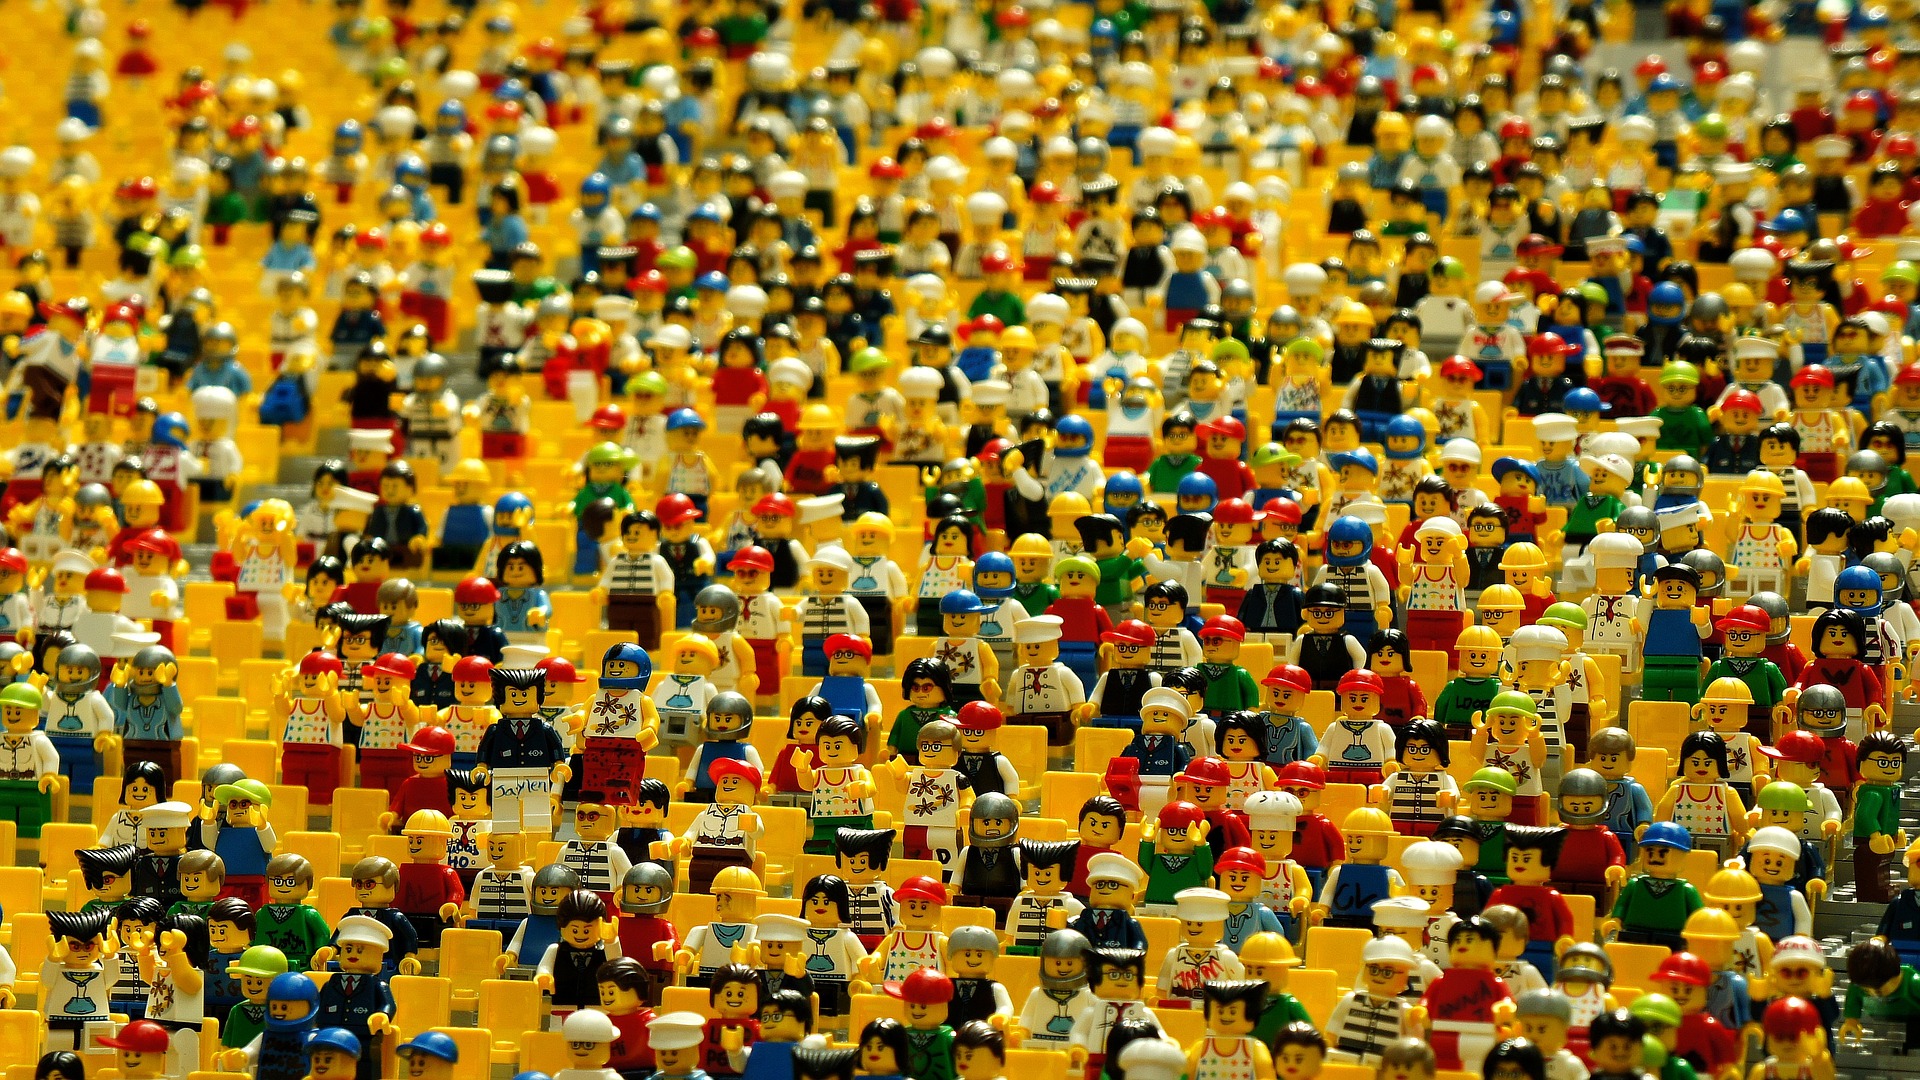 Lego reports over $8 billion in sales during 2021.